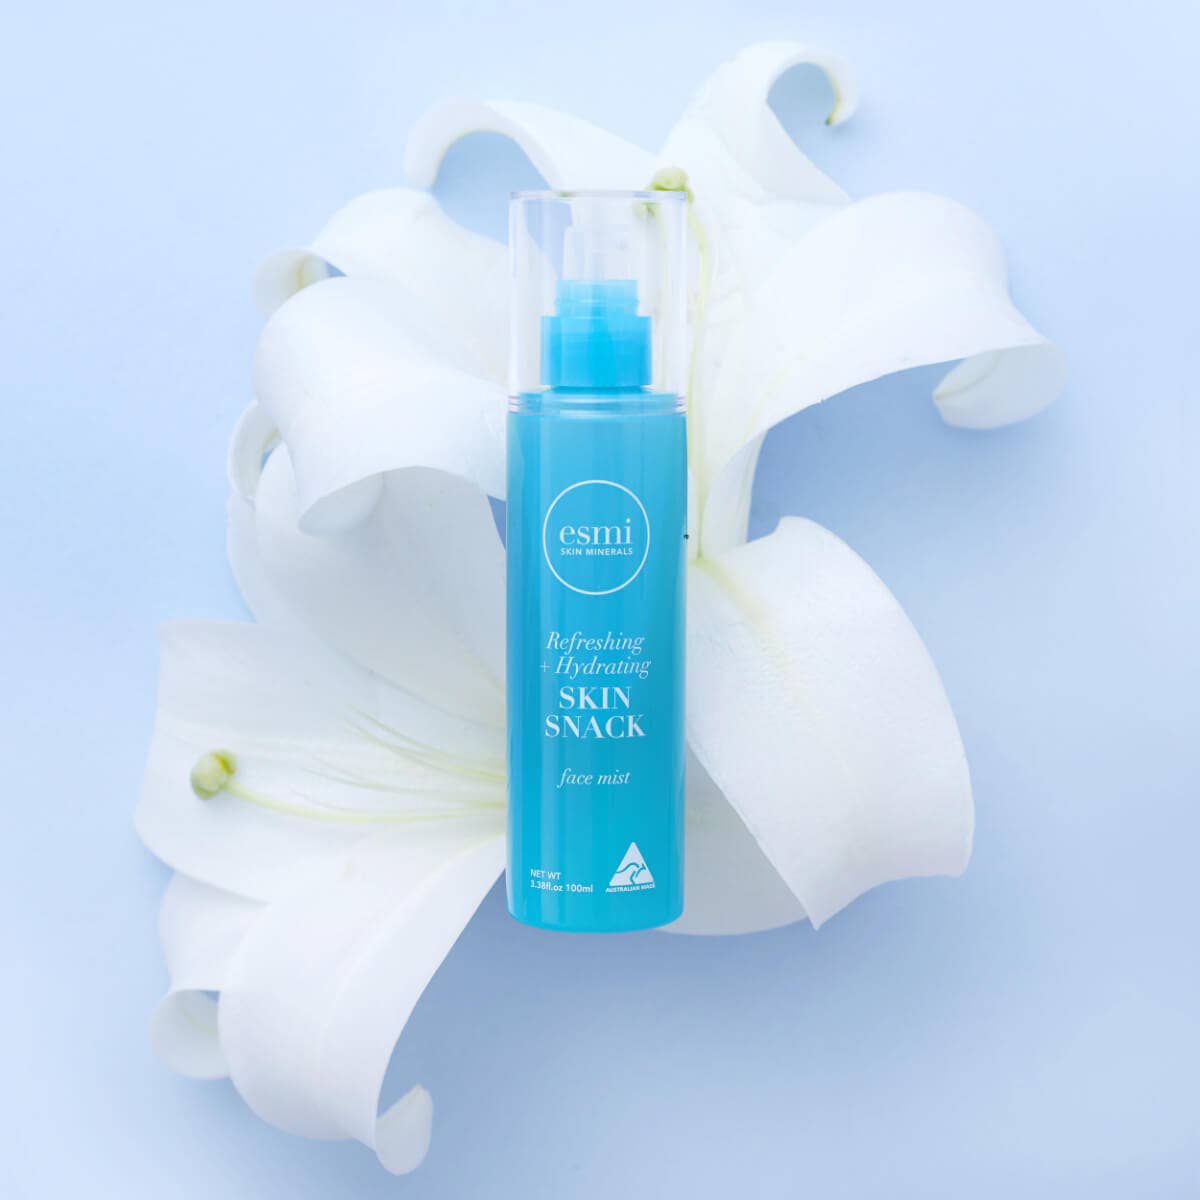 Refreshing and Hydrating Skin Snack face mist 100ml